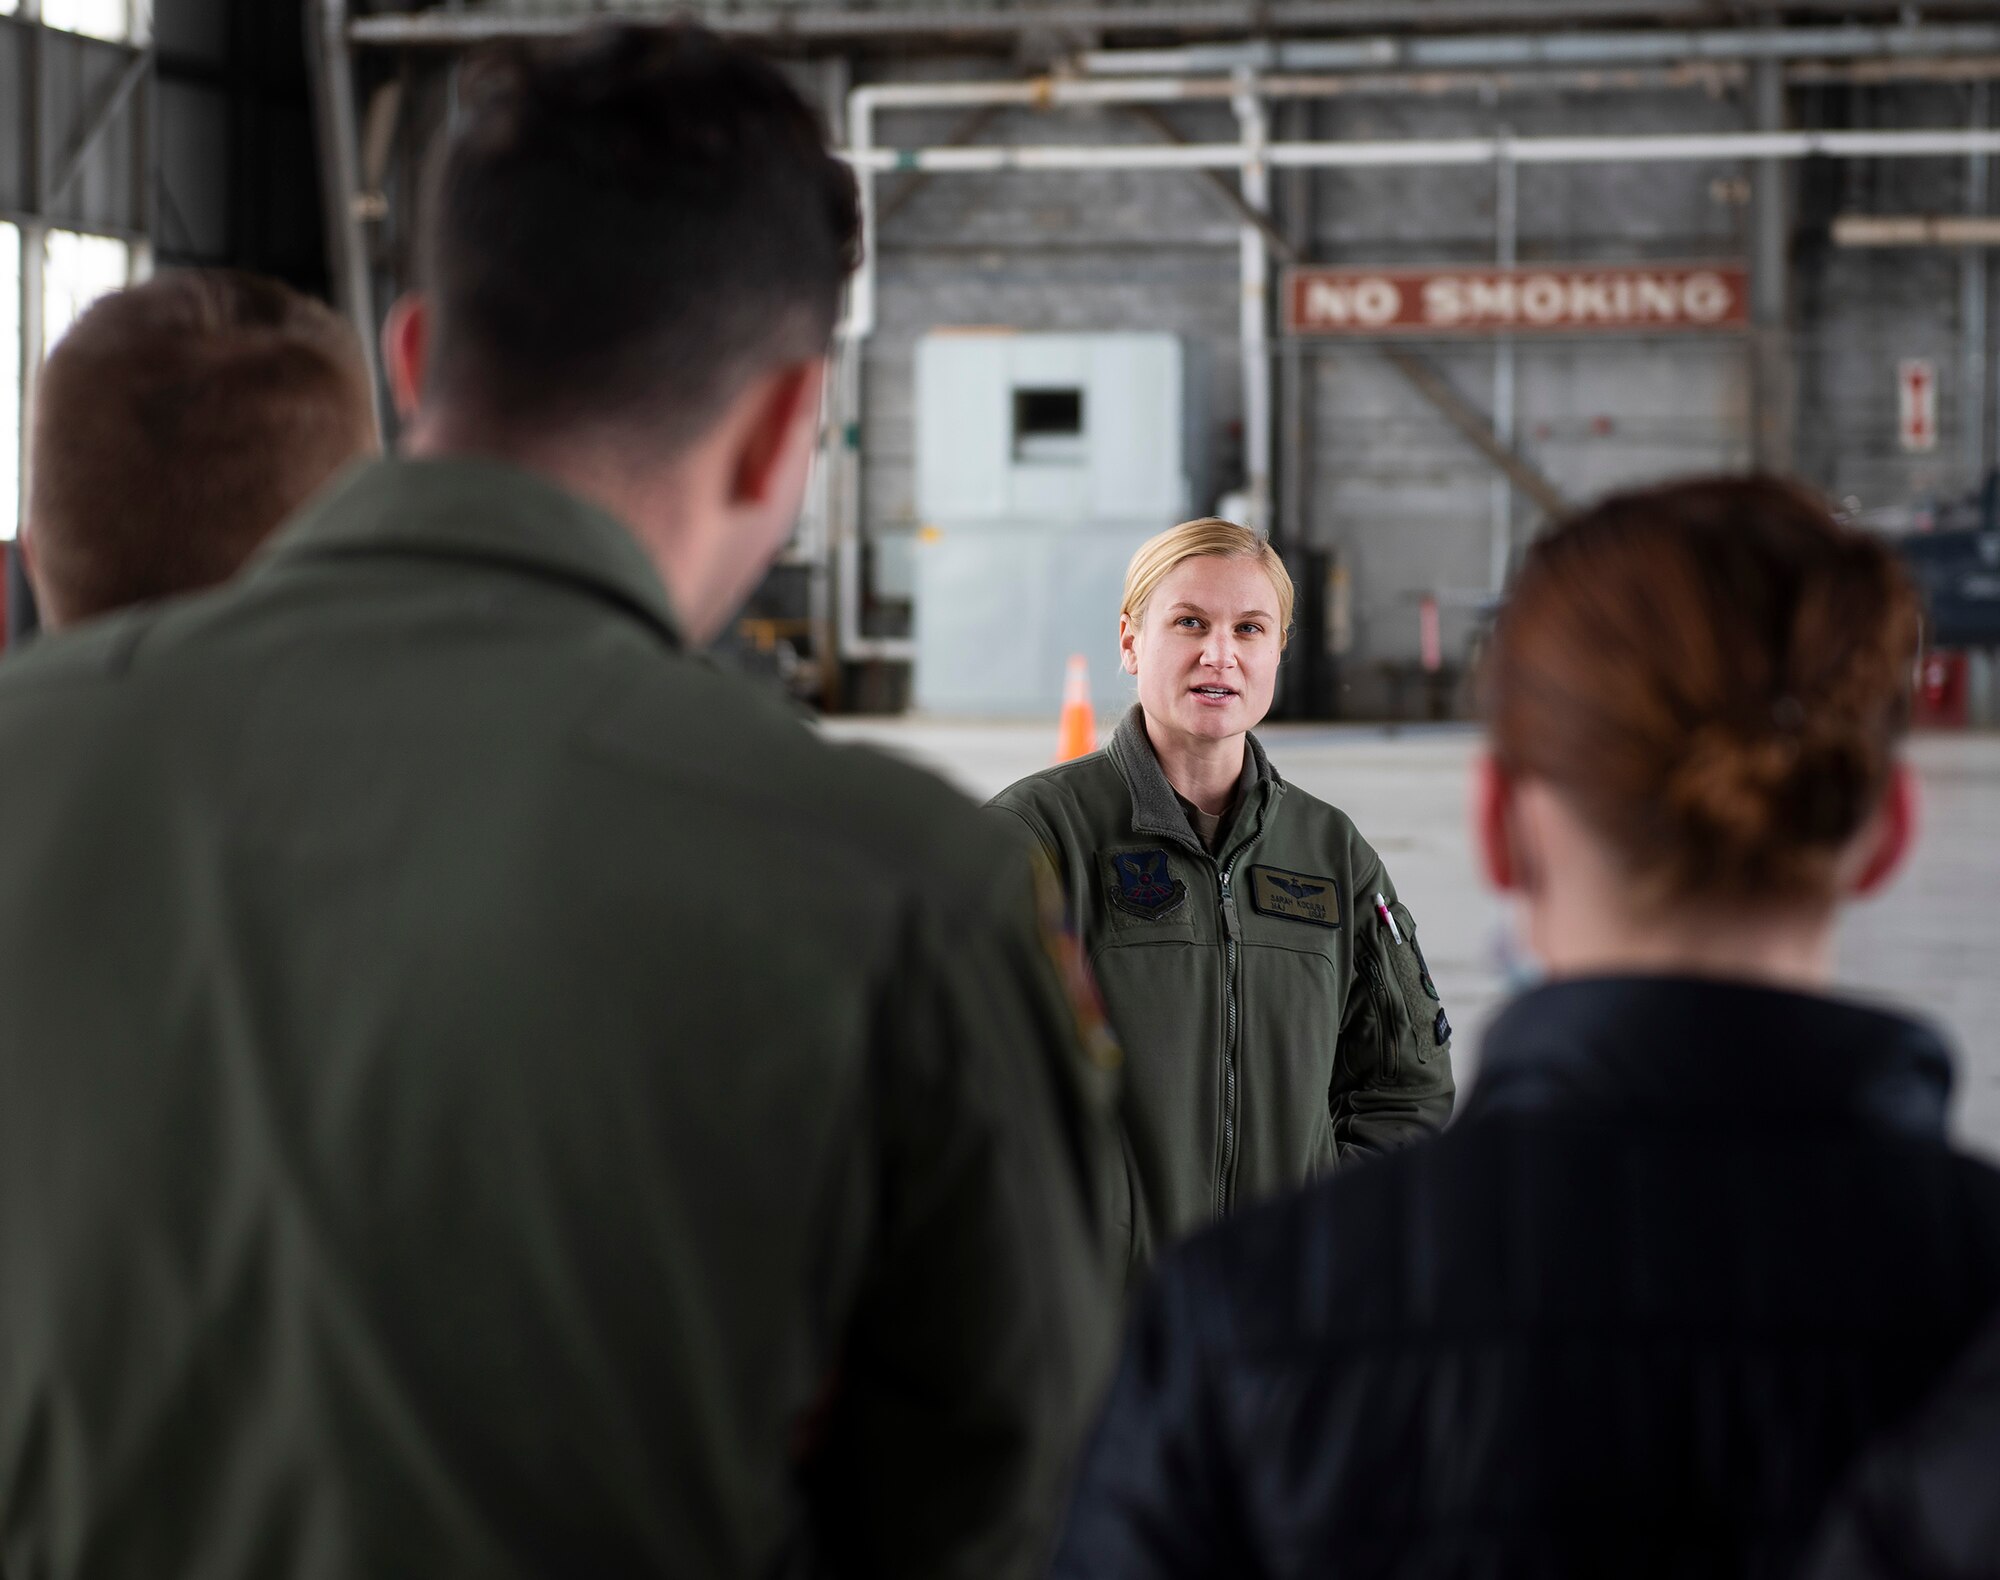 Maj. Sarah Kociuba, 393rd Bomb Squadron pilot, visits with Air Force ROTC cadets of Detachment 643 on Nov. 15, 2021, in a hangar at Wright-Patterson Air Force Base, Ohio. The University of Dayton alum came back to Wright-Patt to talk with students from her old ROTC unit about the transition from cadet to Air Force officer. (U.S. Air Force photo by R.J. Oriez)